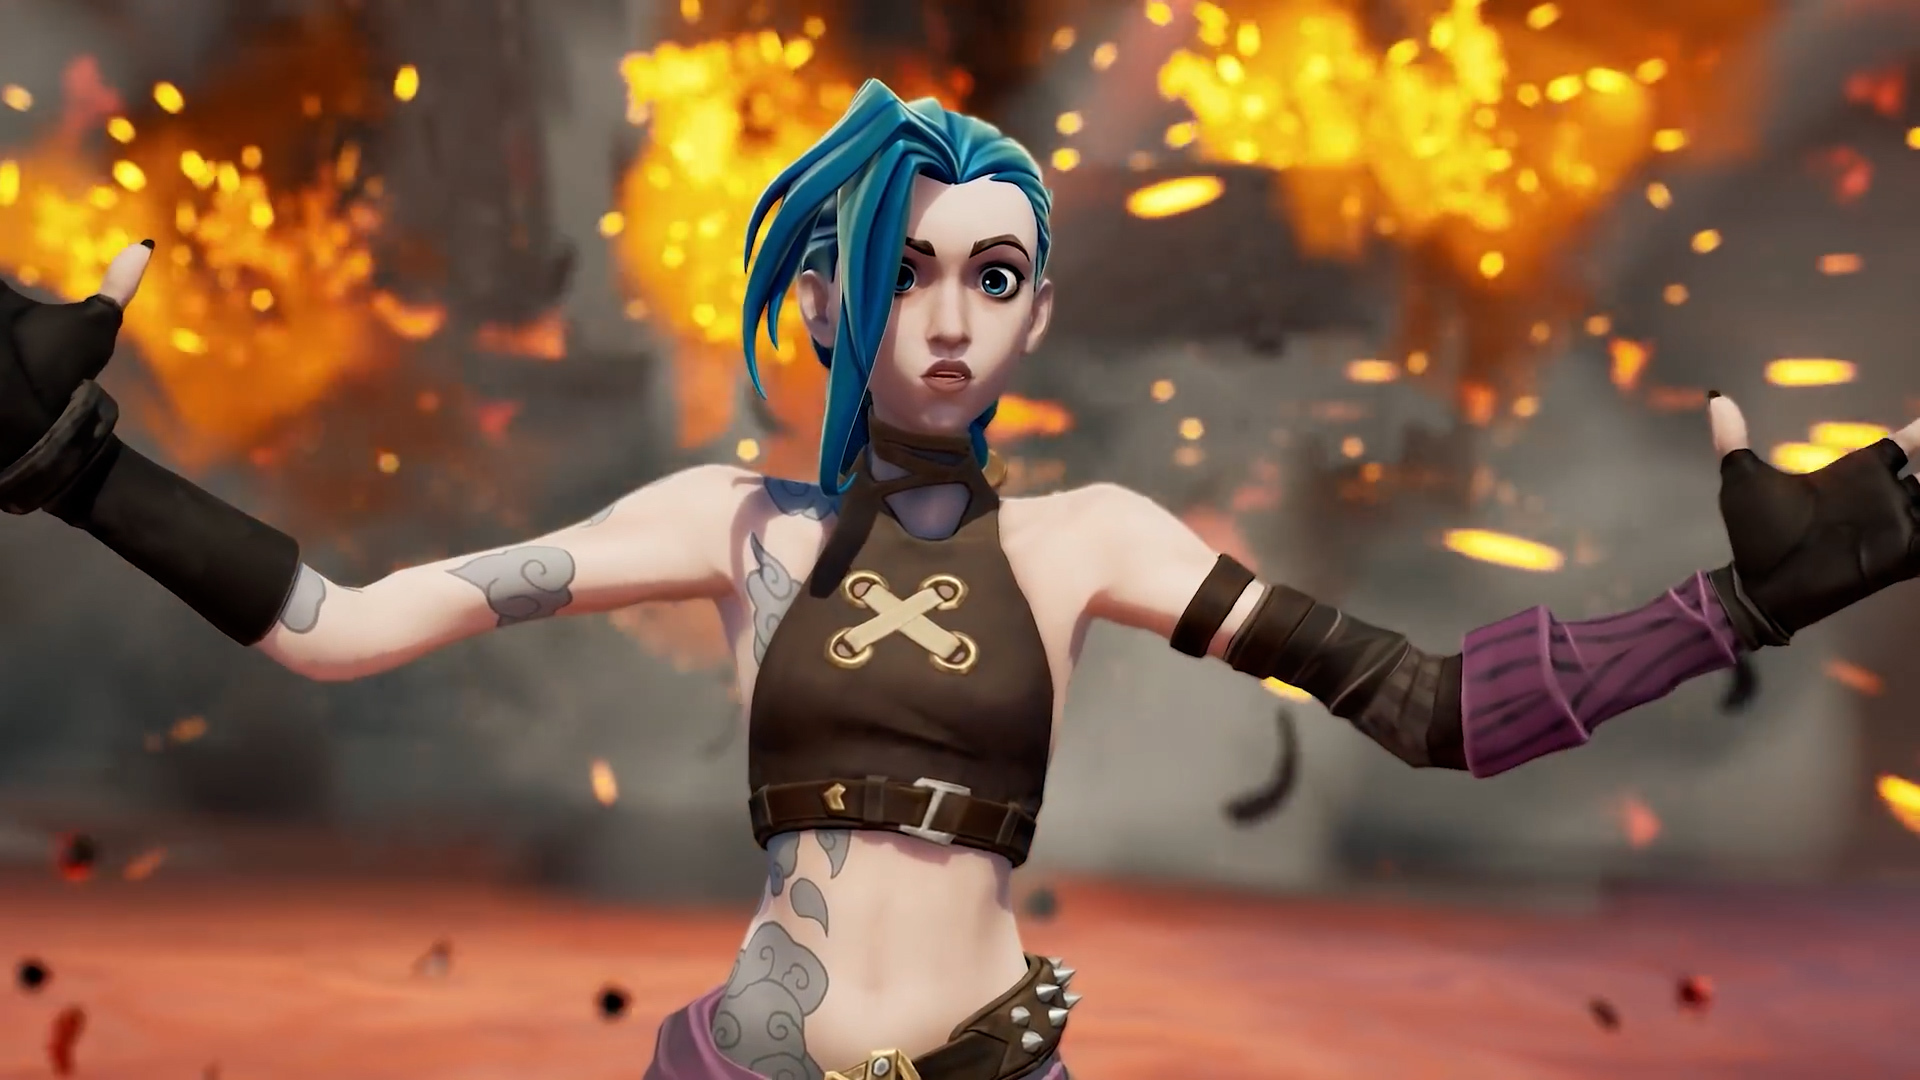 Fortnite X League of Legends Joins The Party